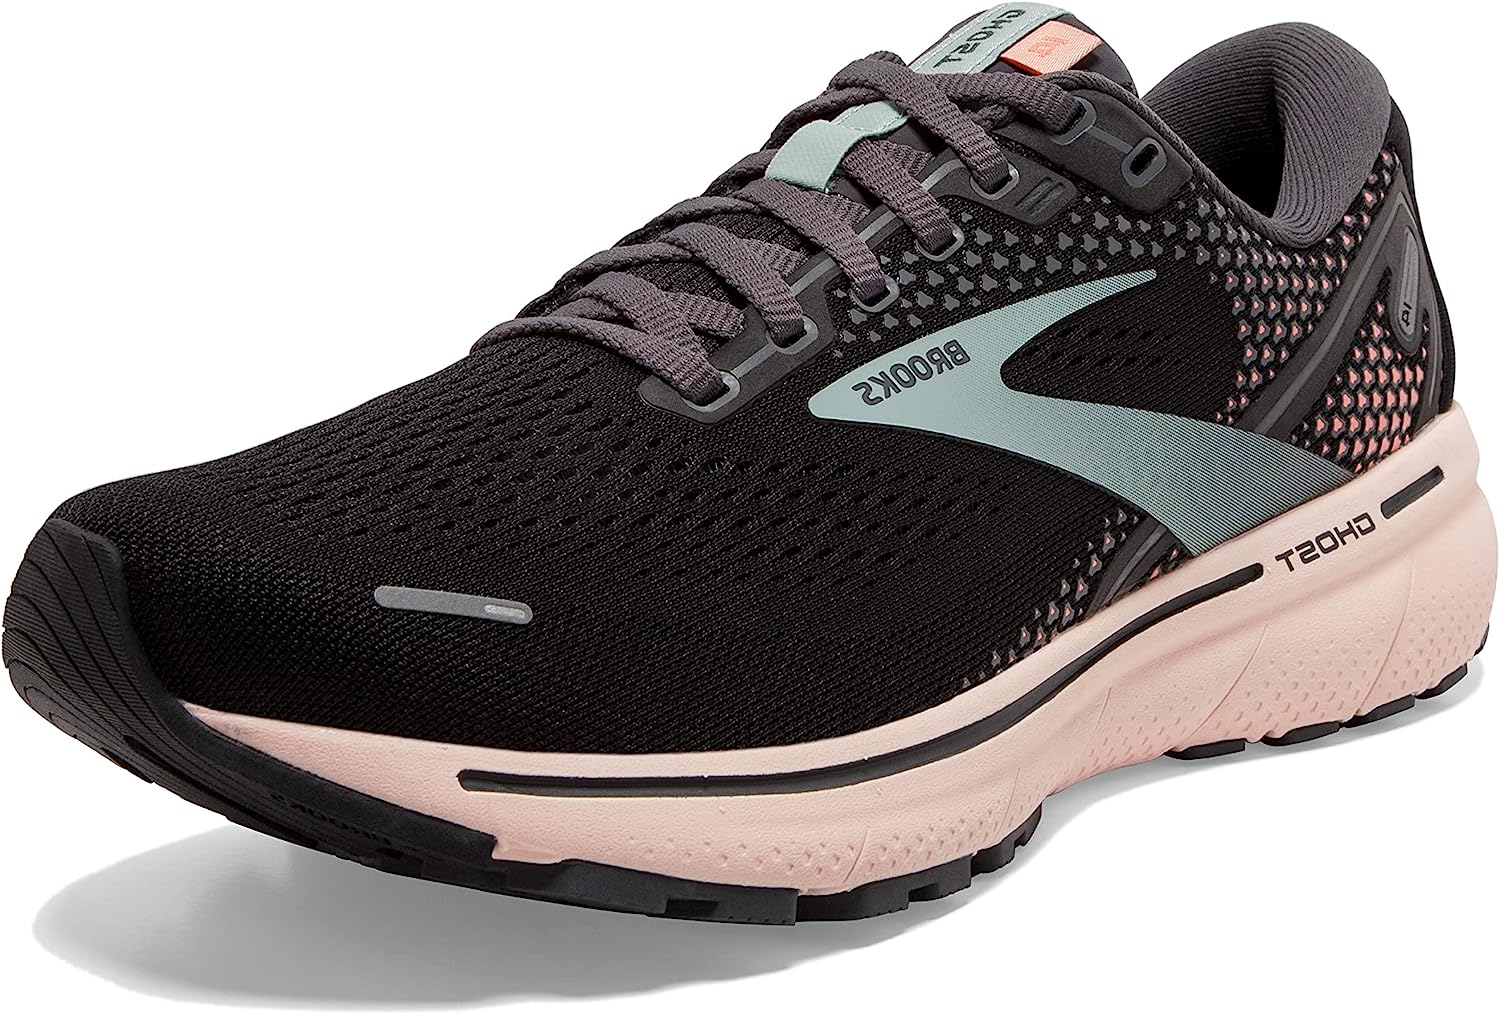 athletic shoes for standing all day detailed review